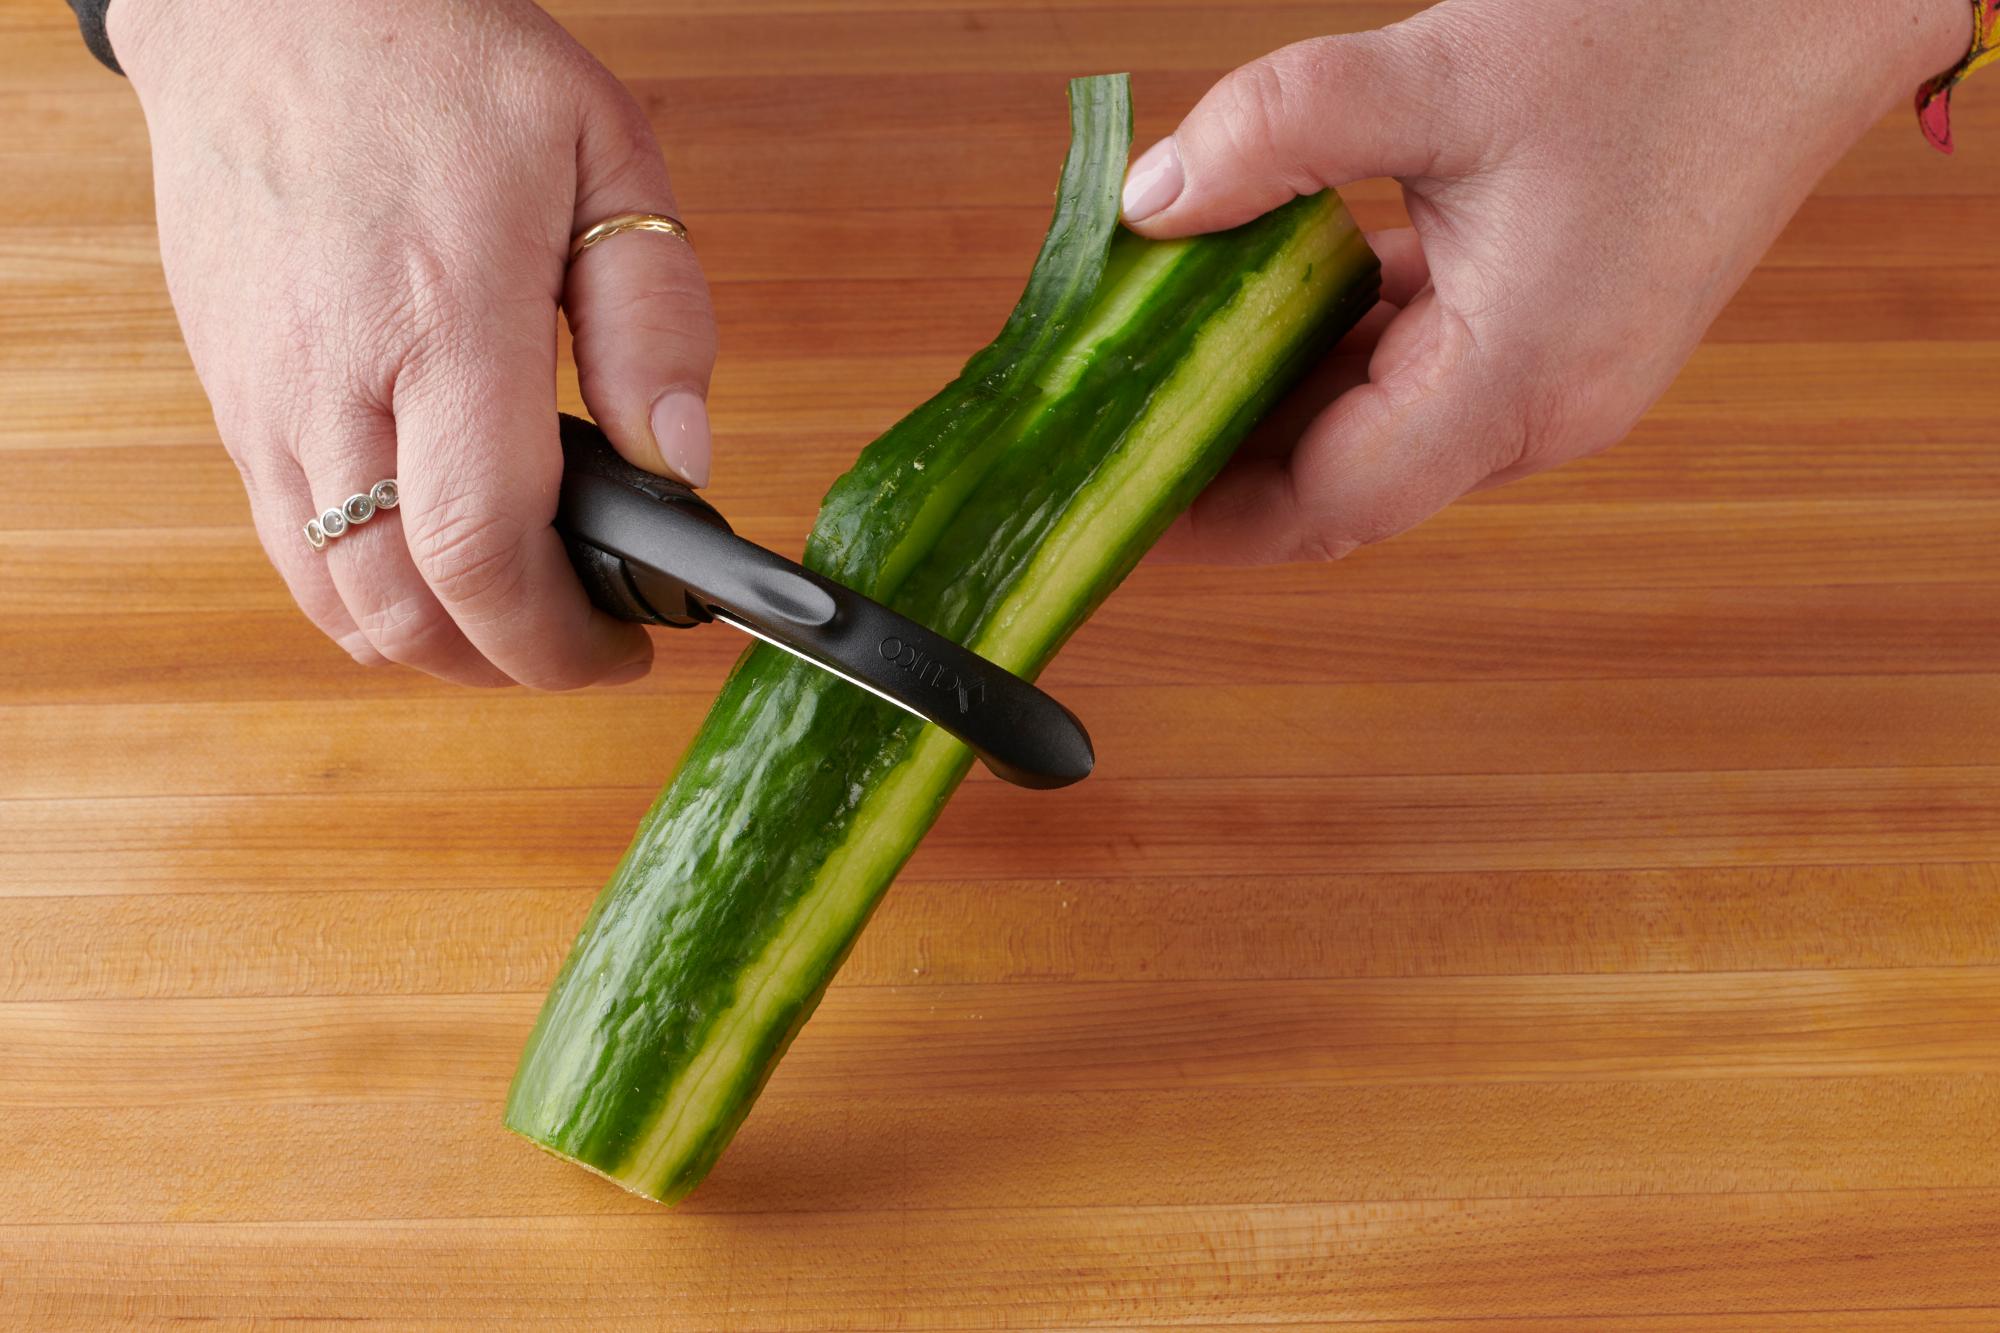 Peeling a cucumber with a Vegetable Peeler